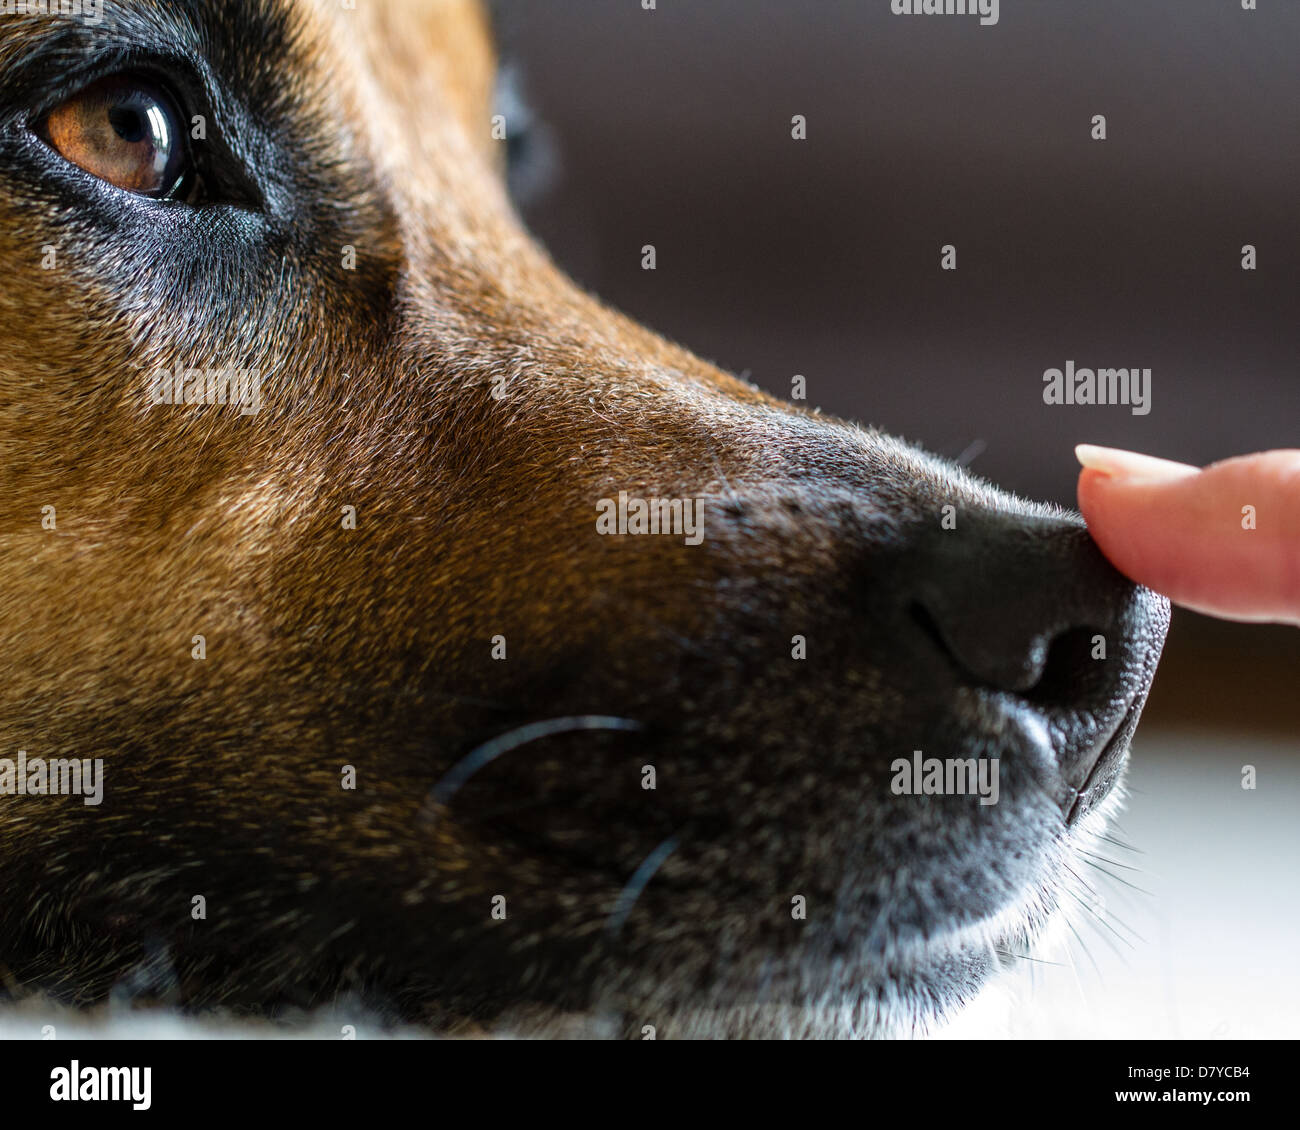 Faithful, loving trust from a dog to its owner Stock Photo